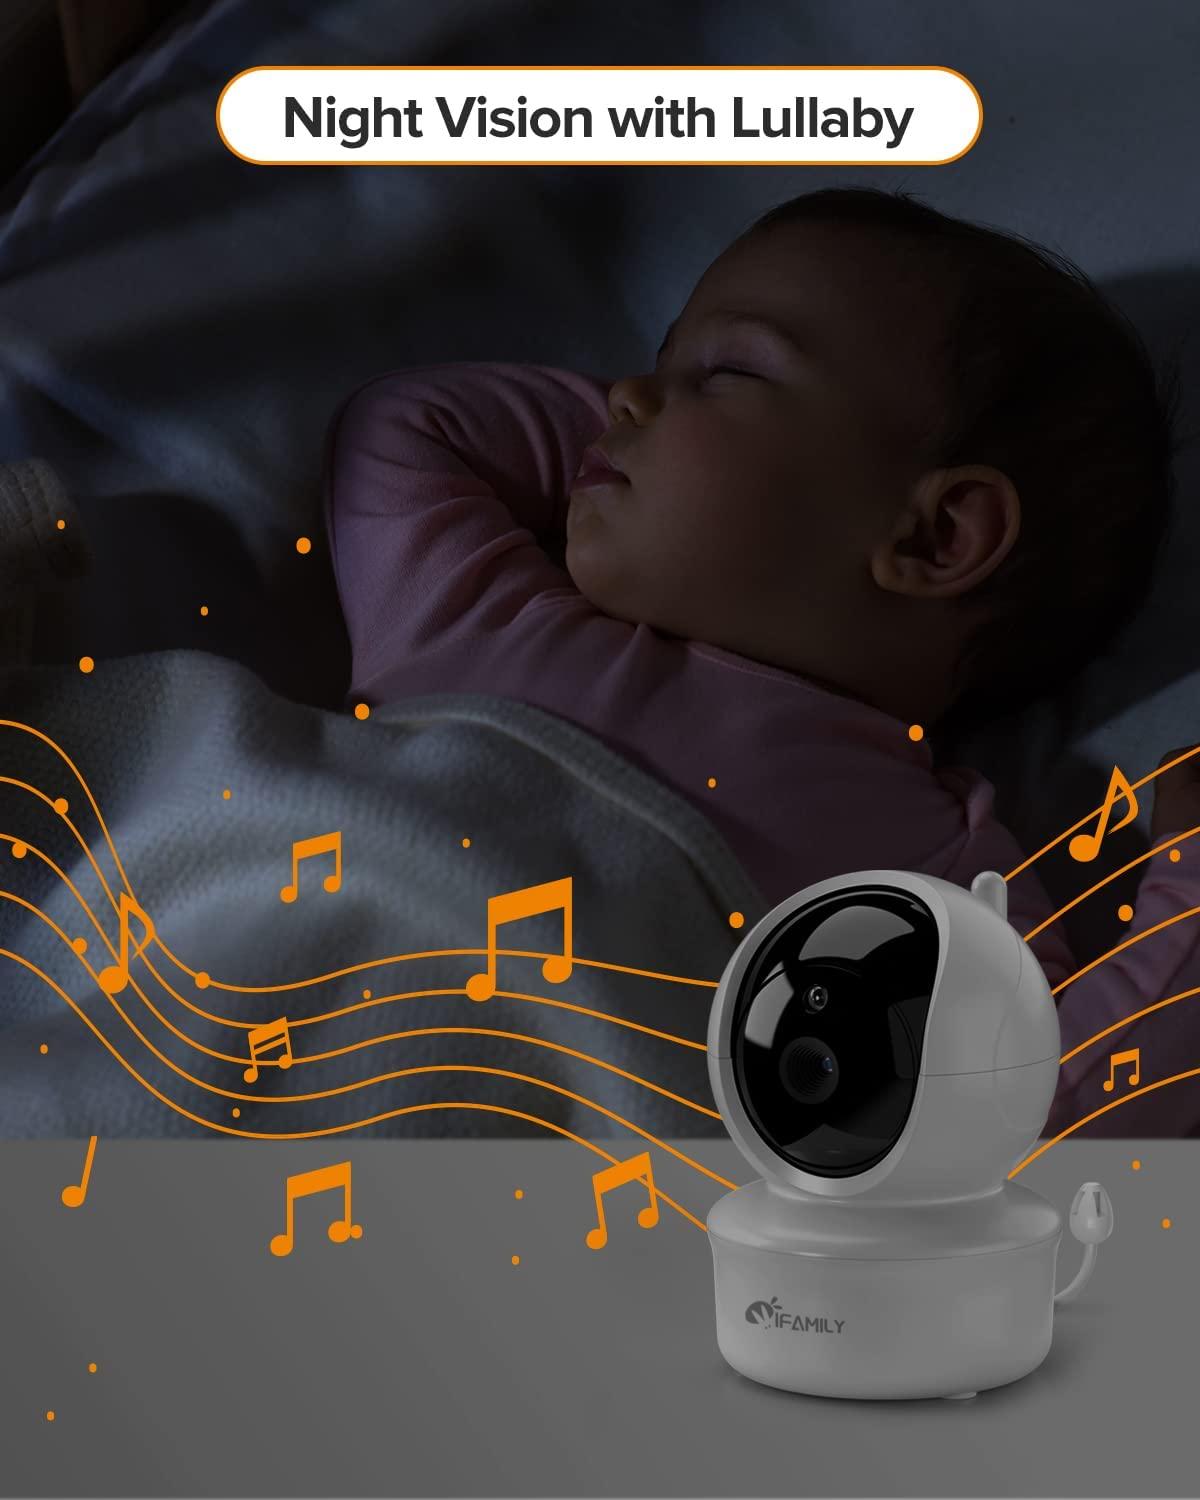 Baby Monitor, Baby Time 5 Color Display with 1080P Pan/Tilt, Infrared  Night Vision, Two-Way Audio, Temperature & Sound Alarm, Smart Nursery Mode,  up